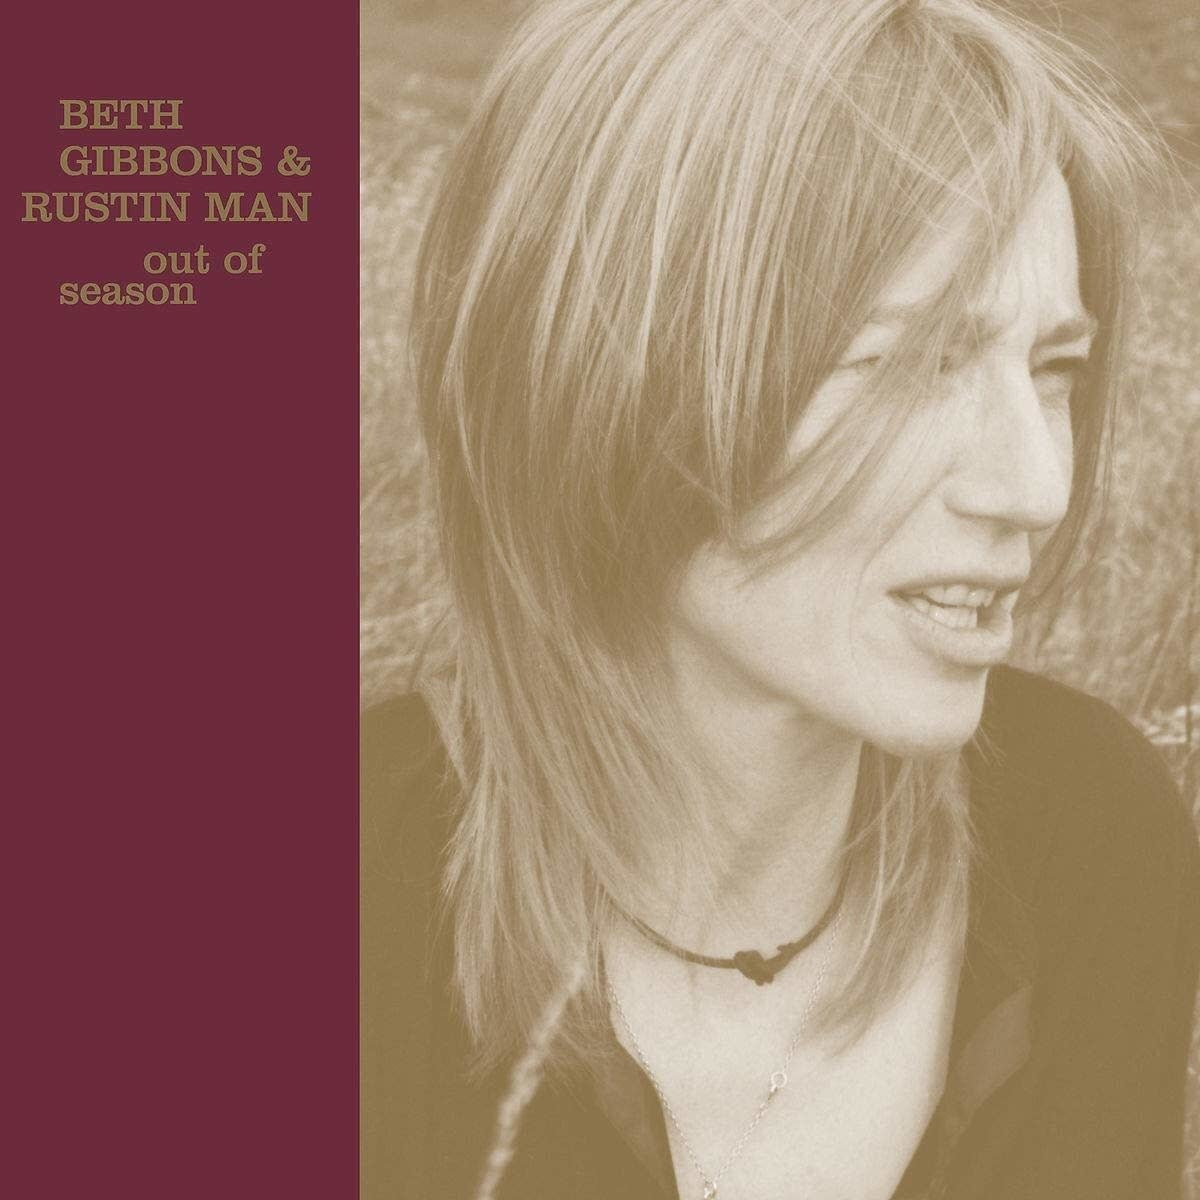 BETH GIBBONS AND RUSTIN MAN - Out Of Season (Remastered) - LP - Vinyl